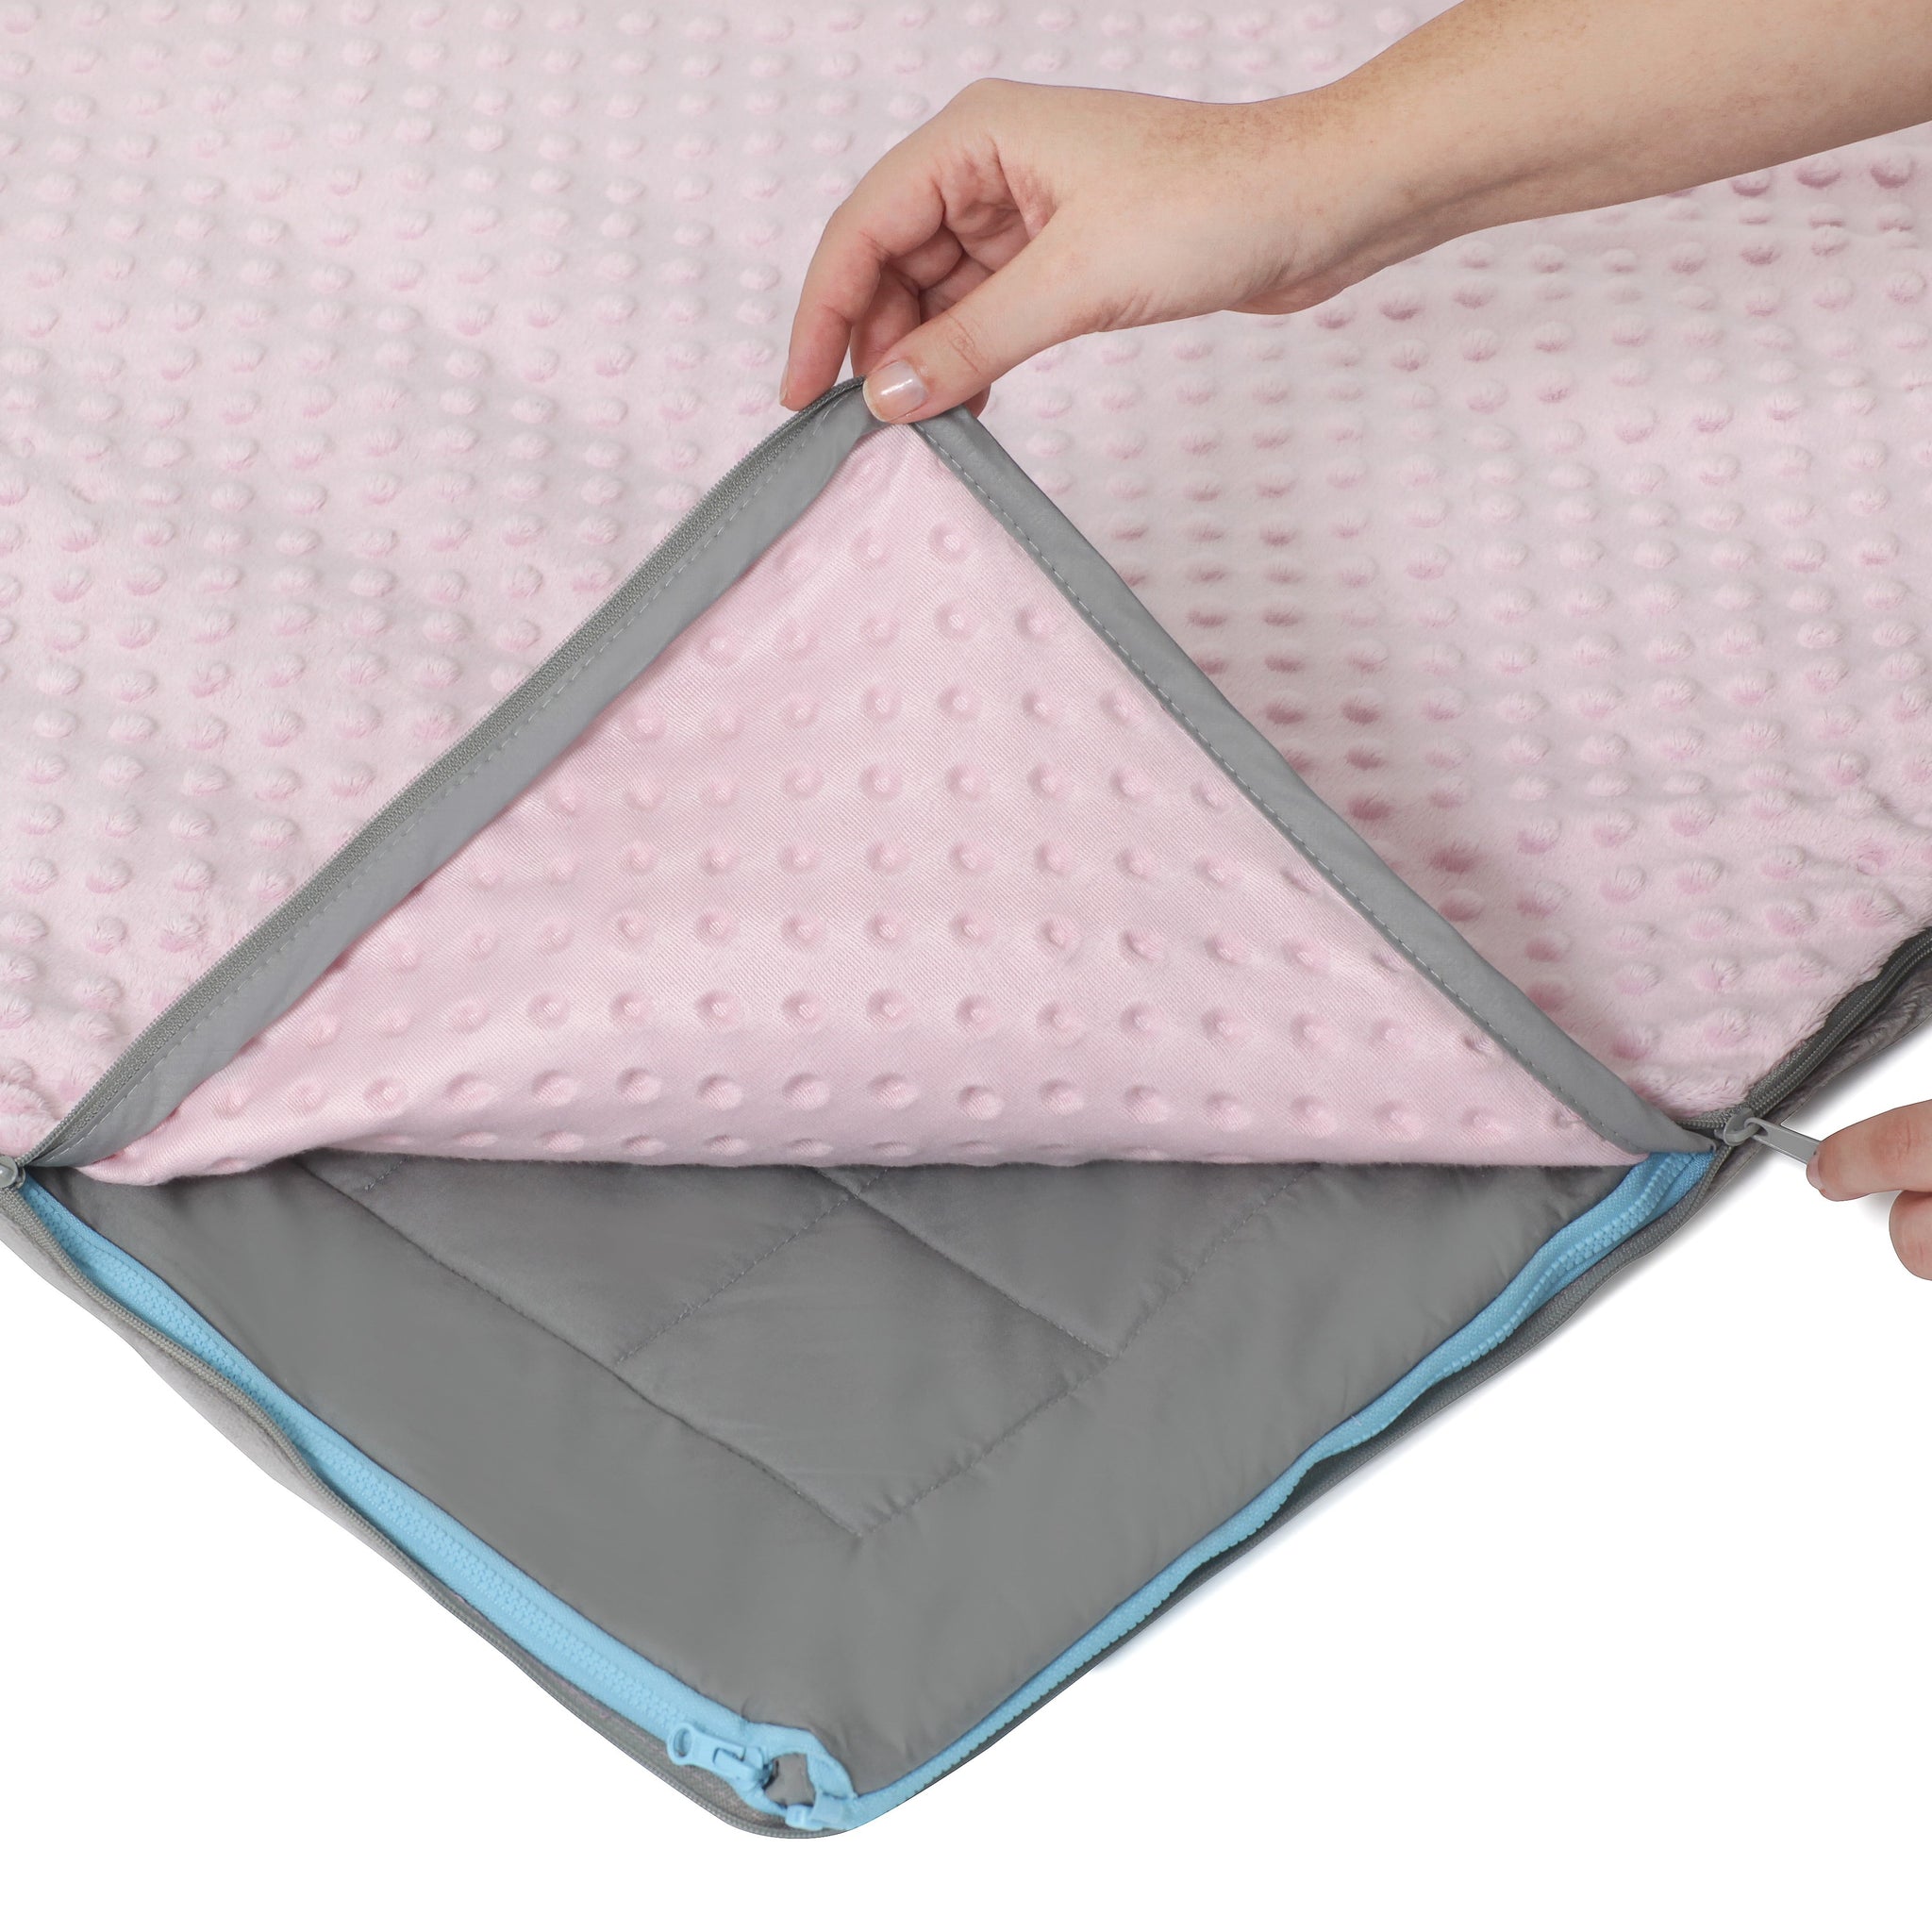 10 lb Weighted Blanket in Light Pink with Patented Zipper System